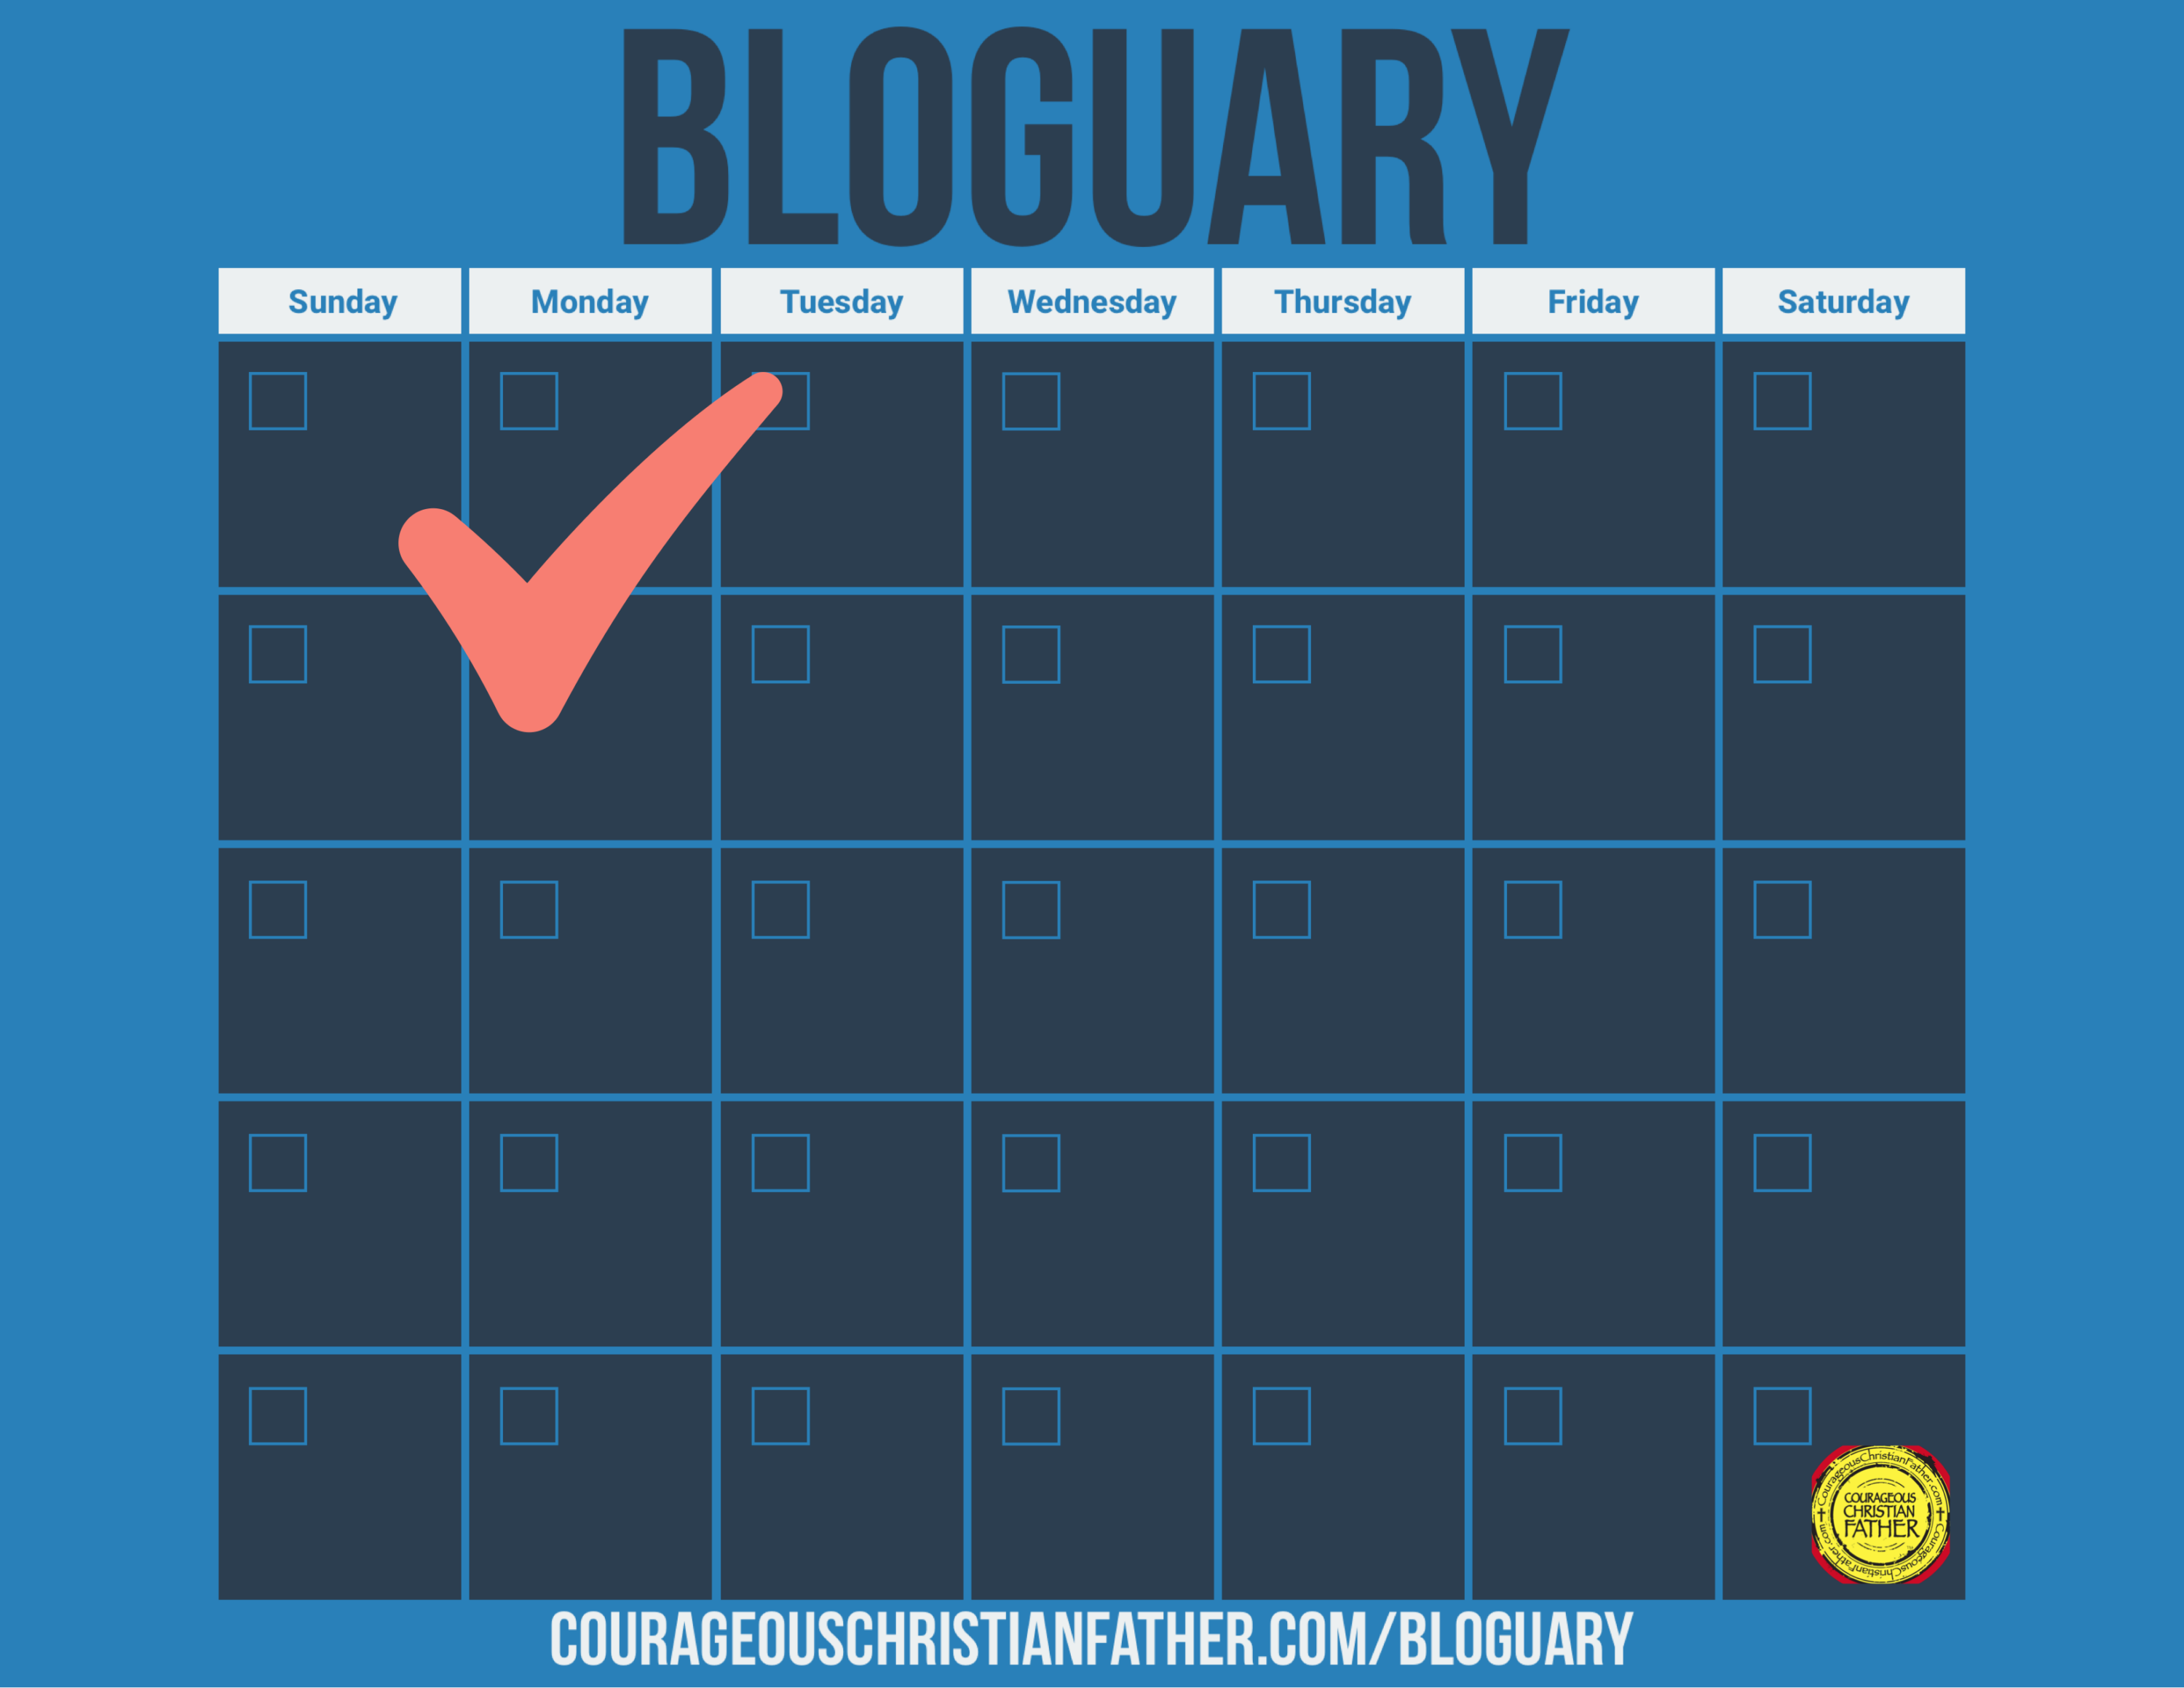 Bloguary is a two month journey for bloggers to post blog post on their blog during the two months ending in -usary … January and February. #bloguary 